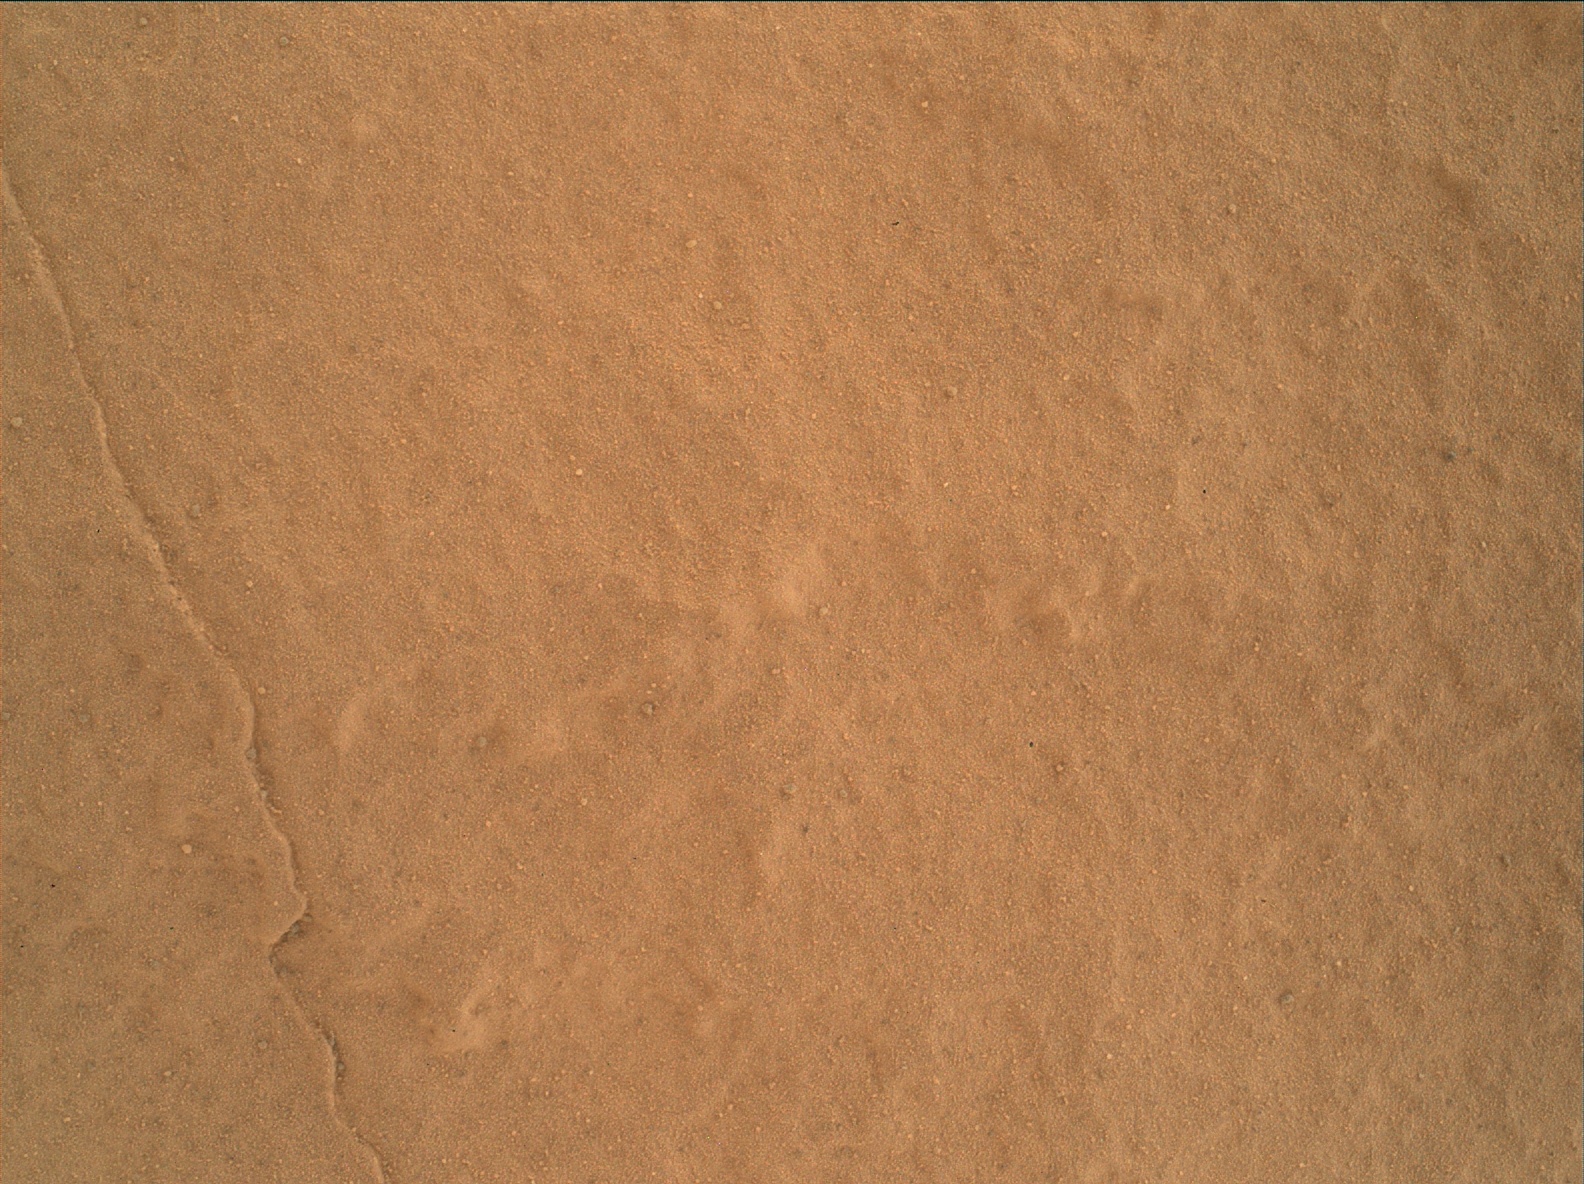 Nasa's Mars rover Curiosity acquired this image using its Mars Hand Lens Imager (MAHLI) on Sol 1830